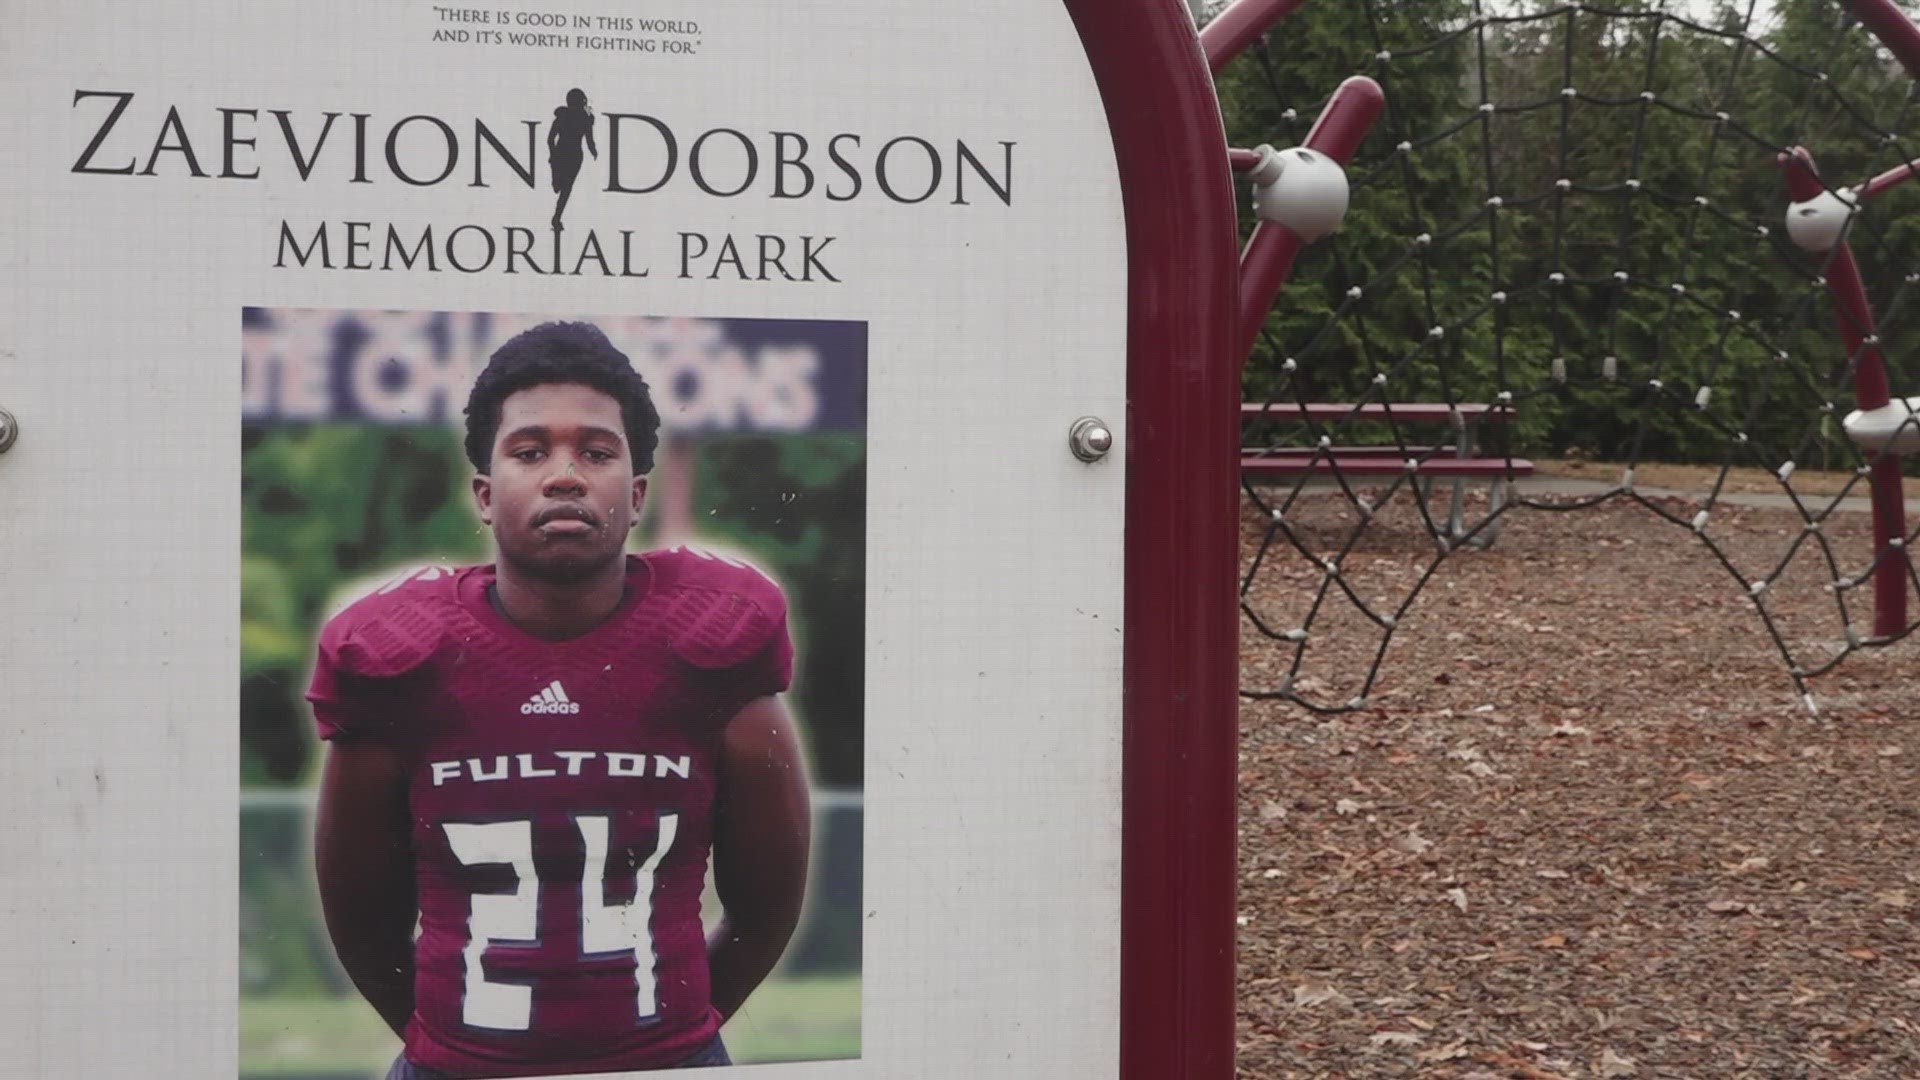 Zaevion Dobson died shielding his friends from gunfire in 2015. He was 15 years old at the time.